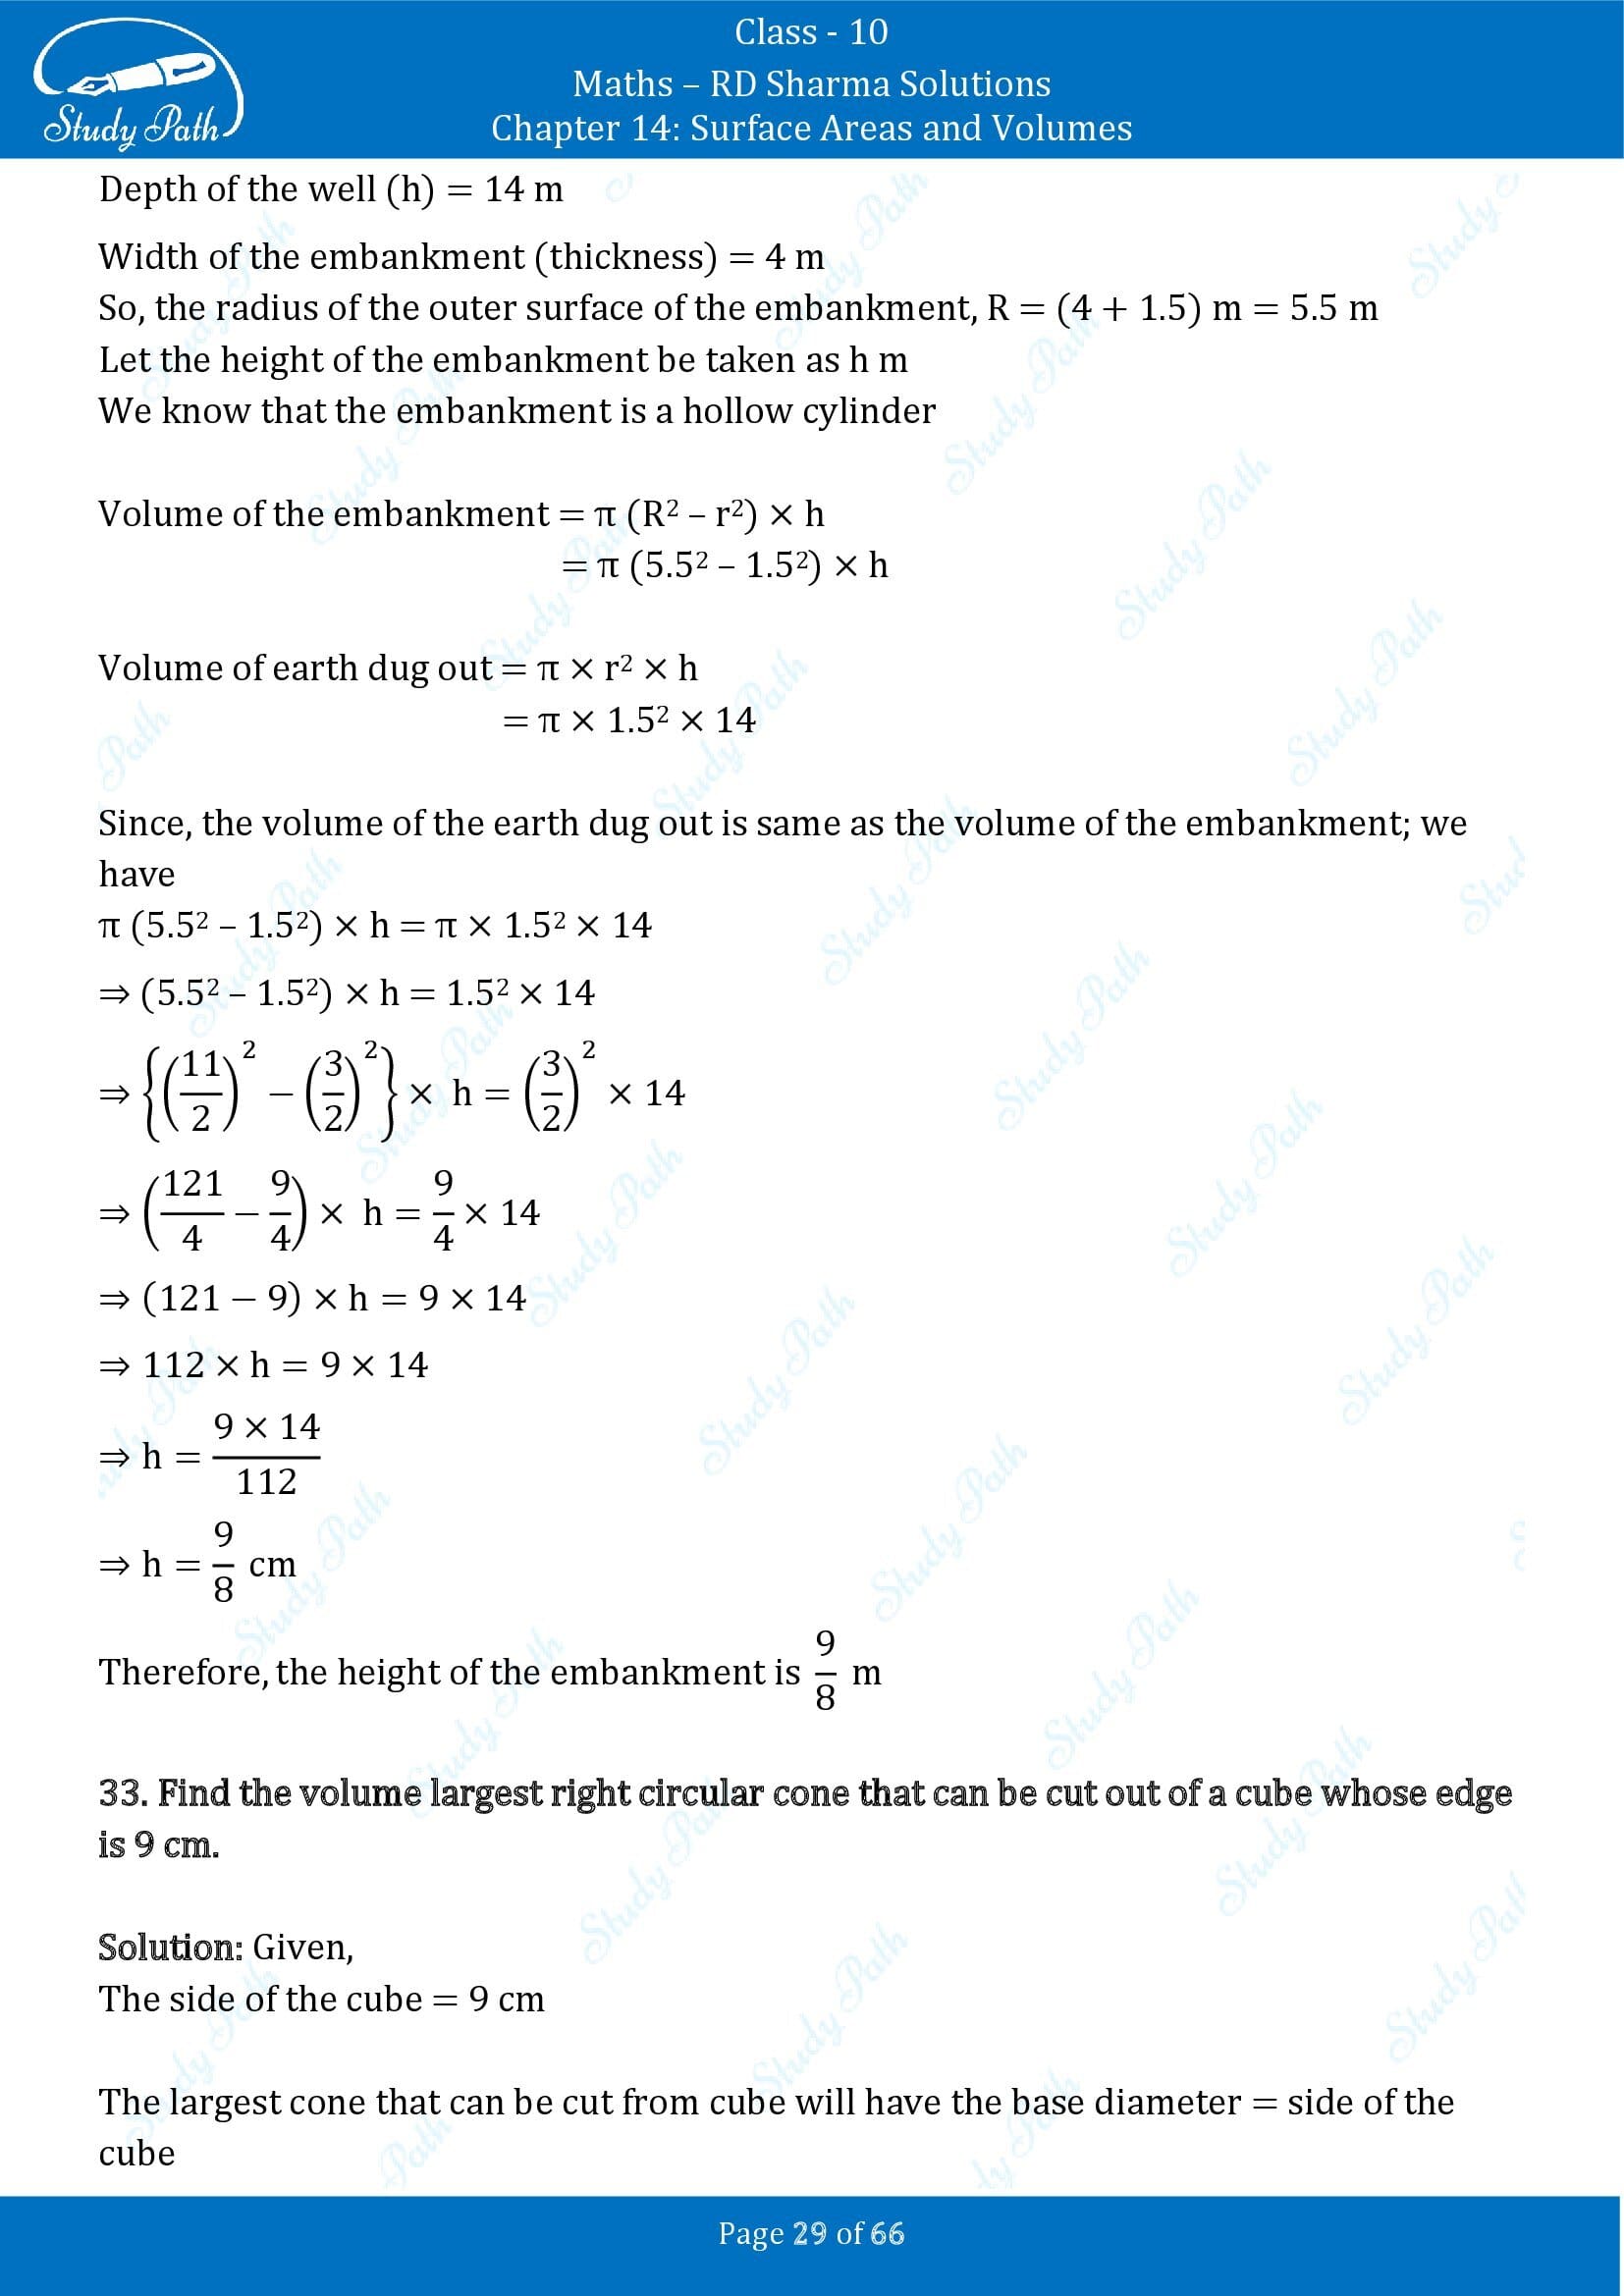 RD Sharma Solutions Class 10 Chapter 14 Surface Areas and Volumes Exercise 14.1 00029